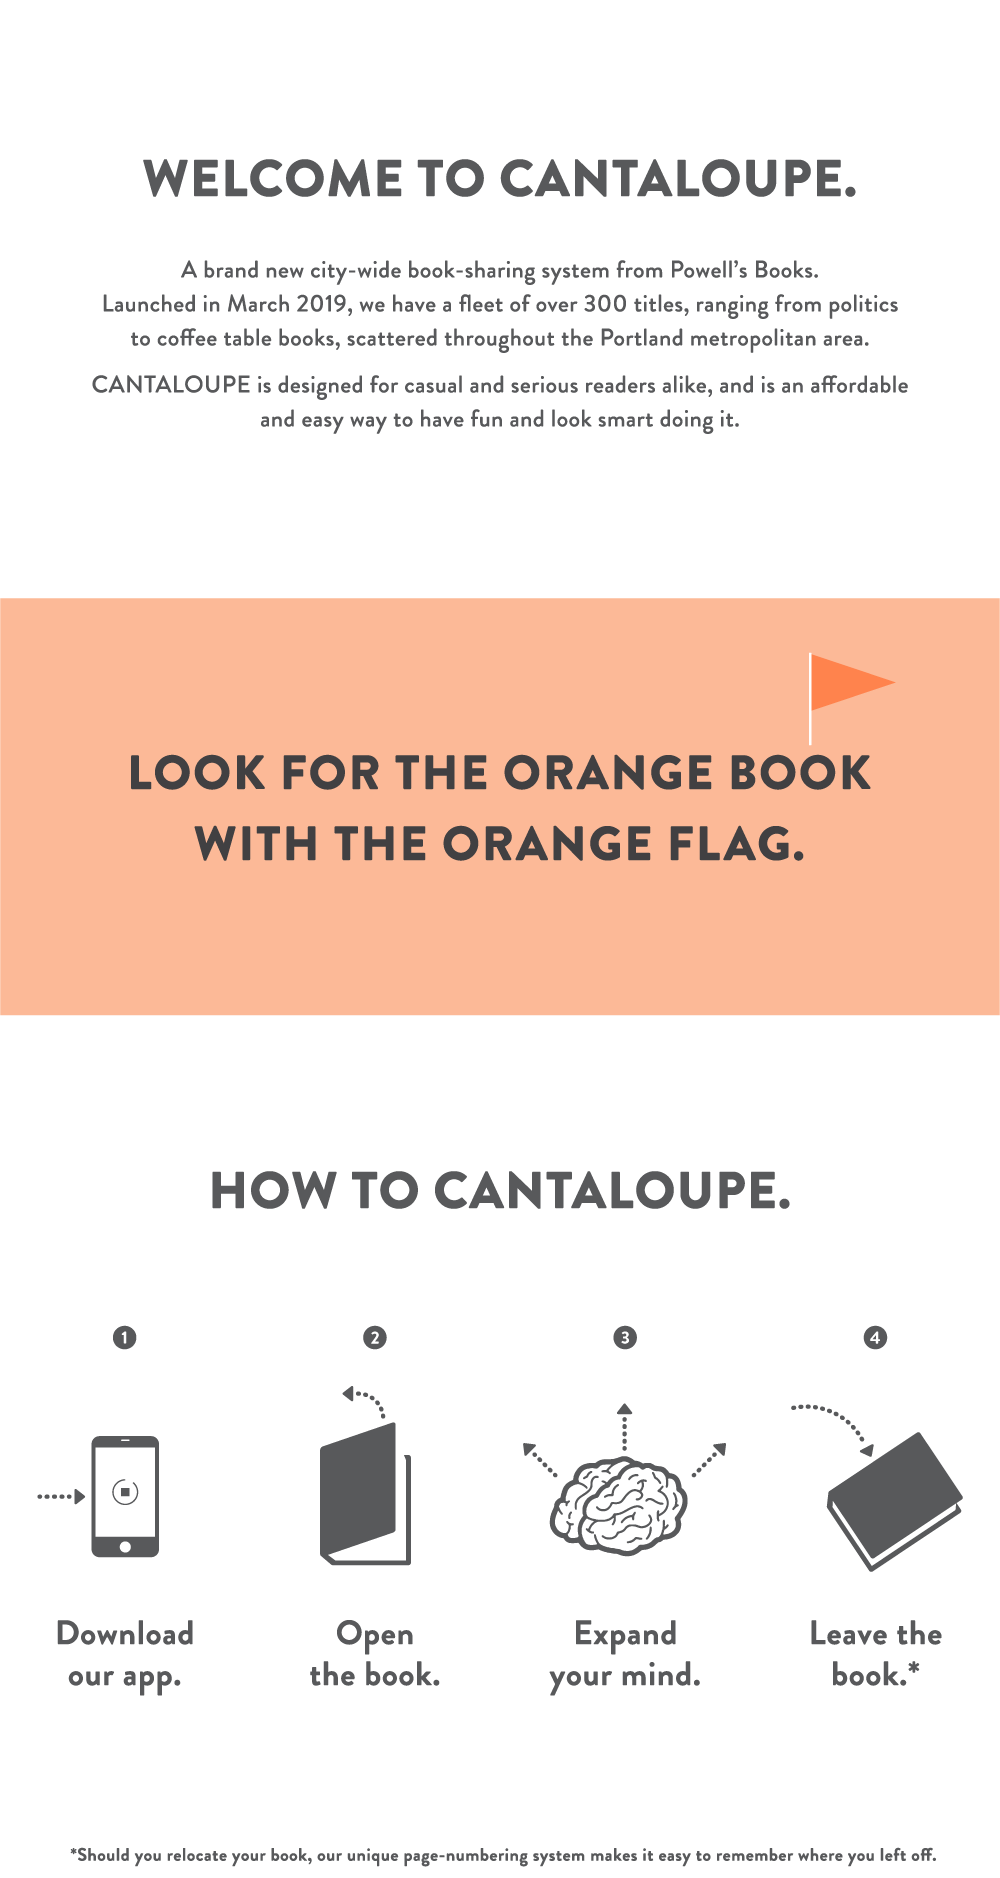 Welcome to Cantaloupe. A brand new city-wide book-sharing system from Powell's Books. Launched in March 2019, we have a fleet of over 300 titles, ranging from politics to coffee table books, scattered throughout the Portland metropolitan area. Cantaloupe is designed for casual and serious readers alike, and is an affordable and easy way to have fun and look smart doing it. Look for the orange book with the orange flag. How to cantaloupe. Download our app. Open the book. Expand your mind. Leave the book.* Should you relocate your book, our unique page-numbering system makes it easy to remember where you left off.